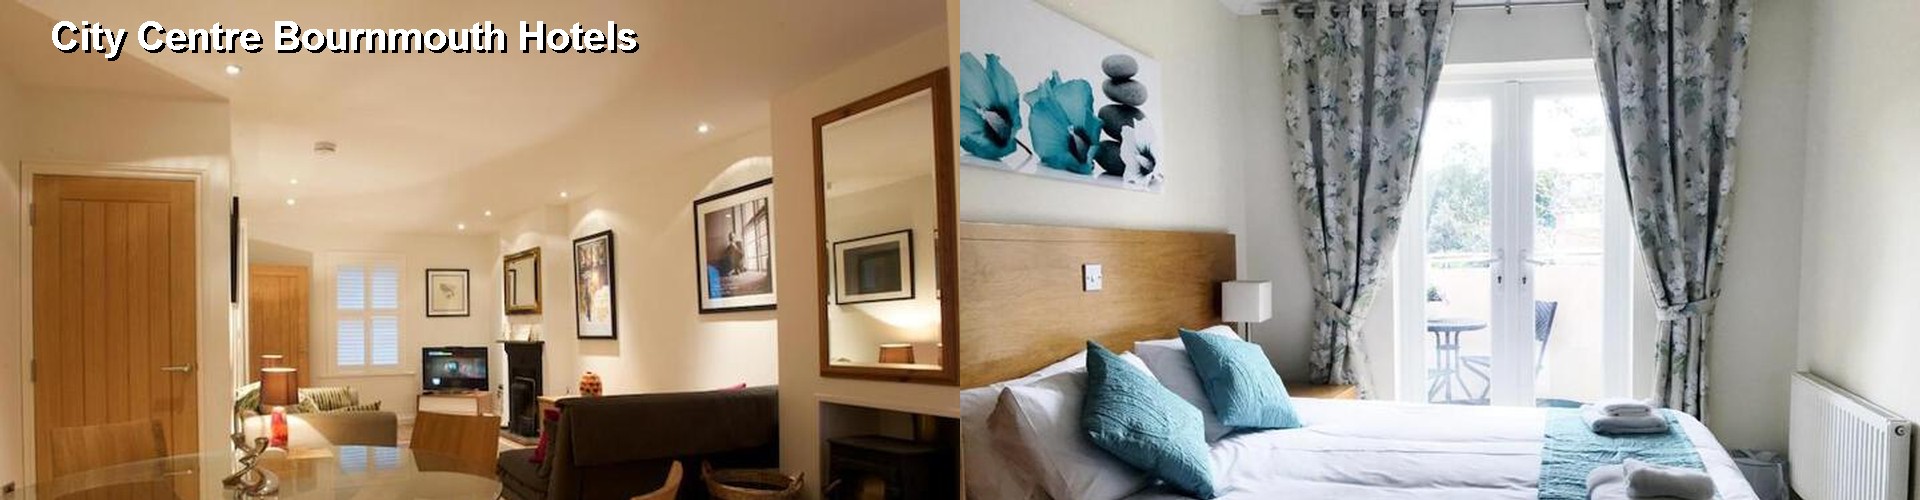 4 Best Hotels near City Centre Bournmouth